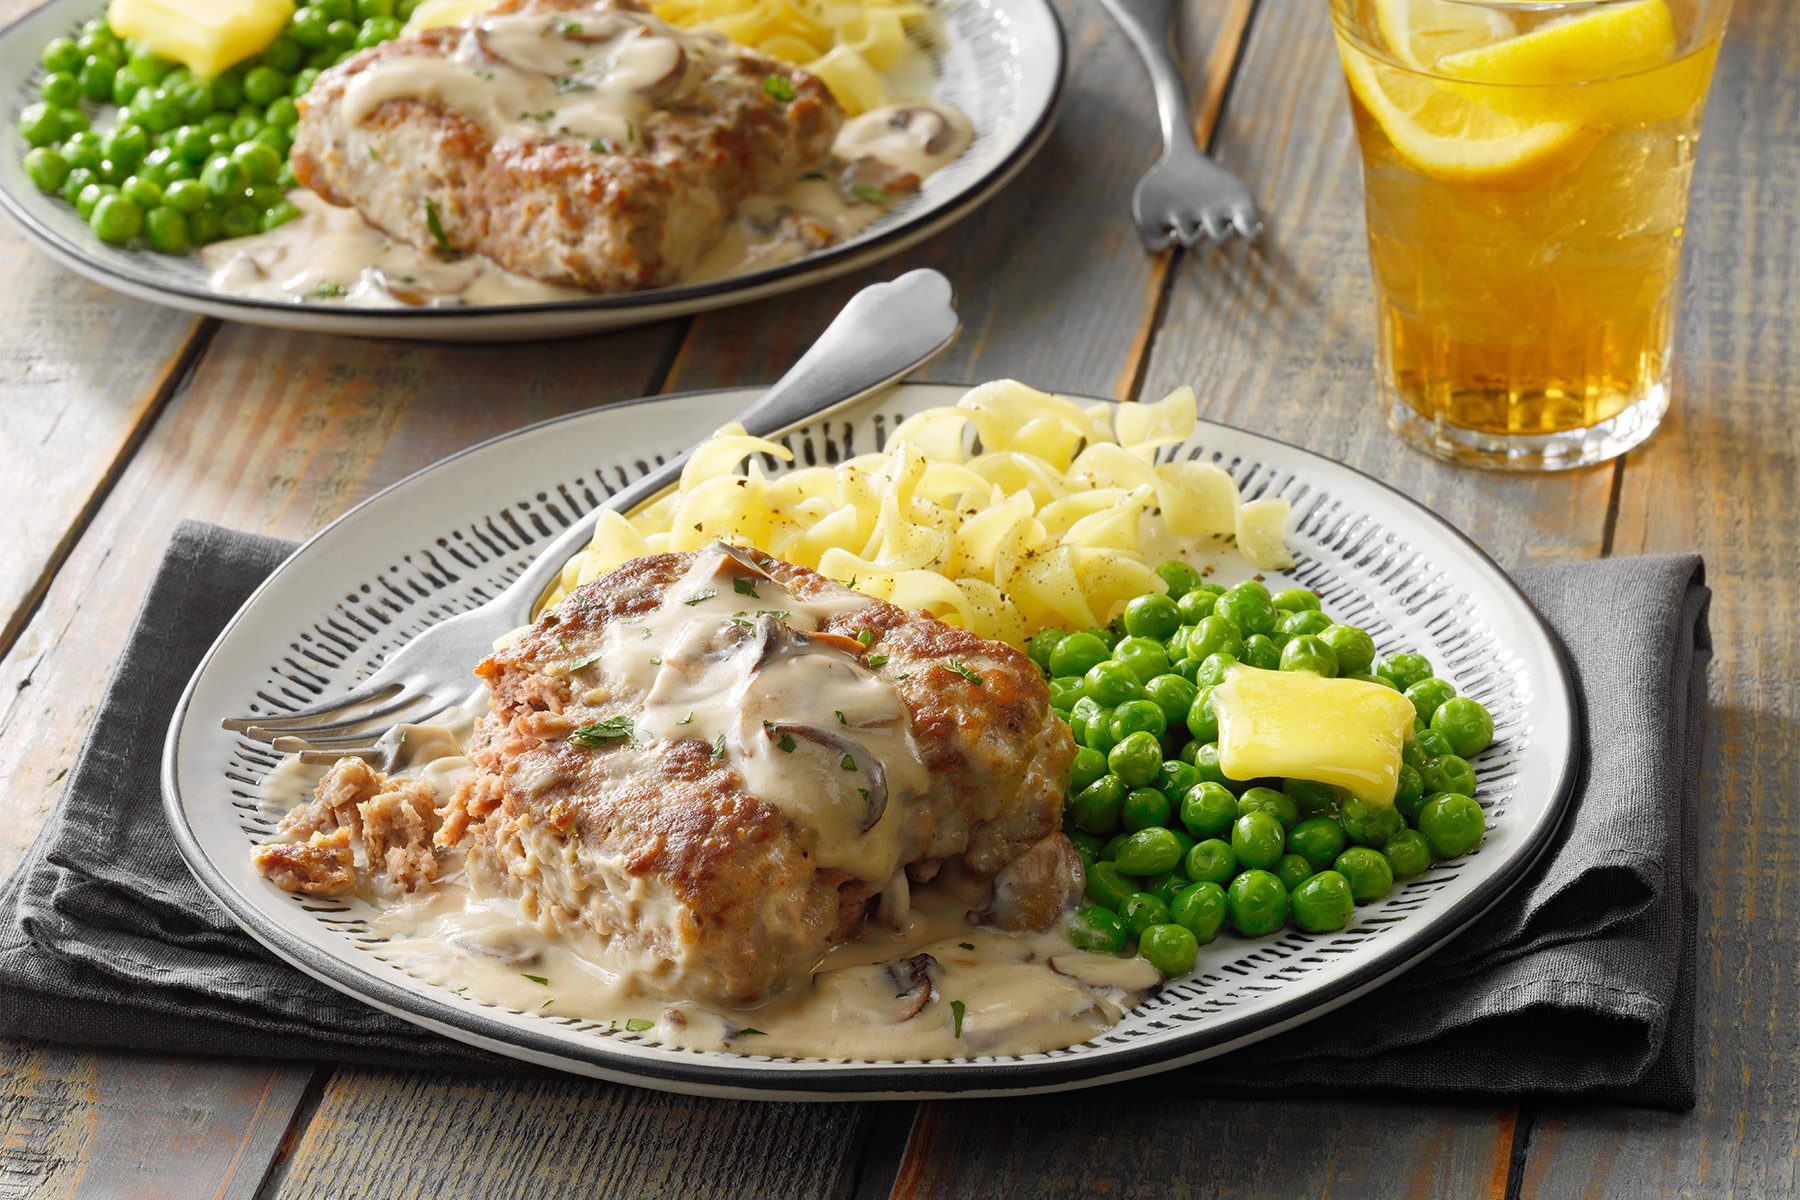 Two plates of hearty meals with sliced pork chops covered in creamy mushroom sauce, sides of green peas, and buttered egg noodles. Each plate is garnished neatly. In the background is an ice-cold drink with lemon slices. The meal is set on a wooden table.